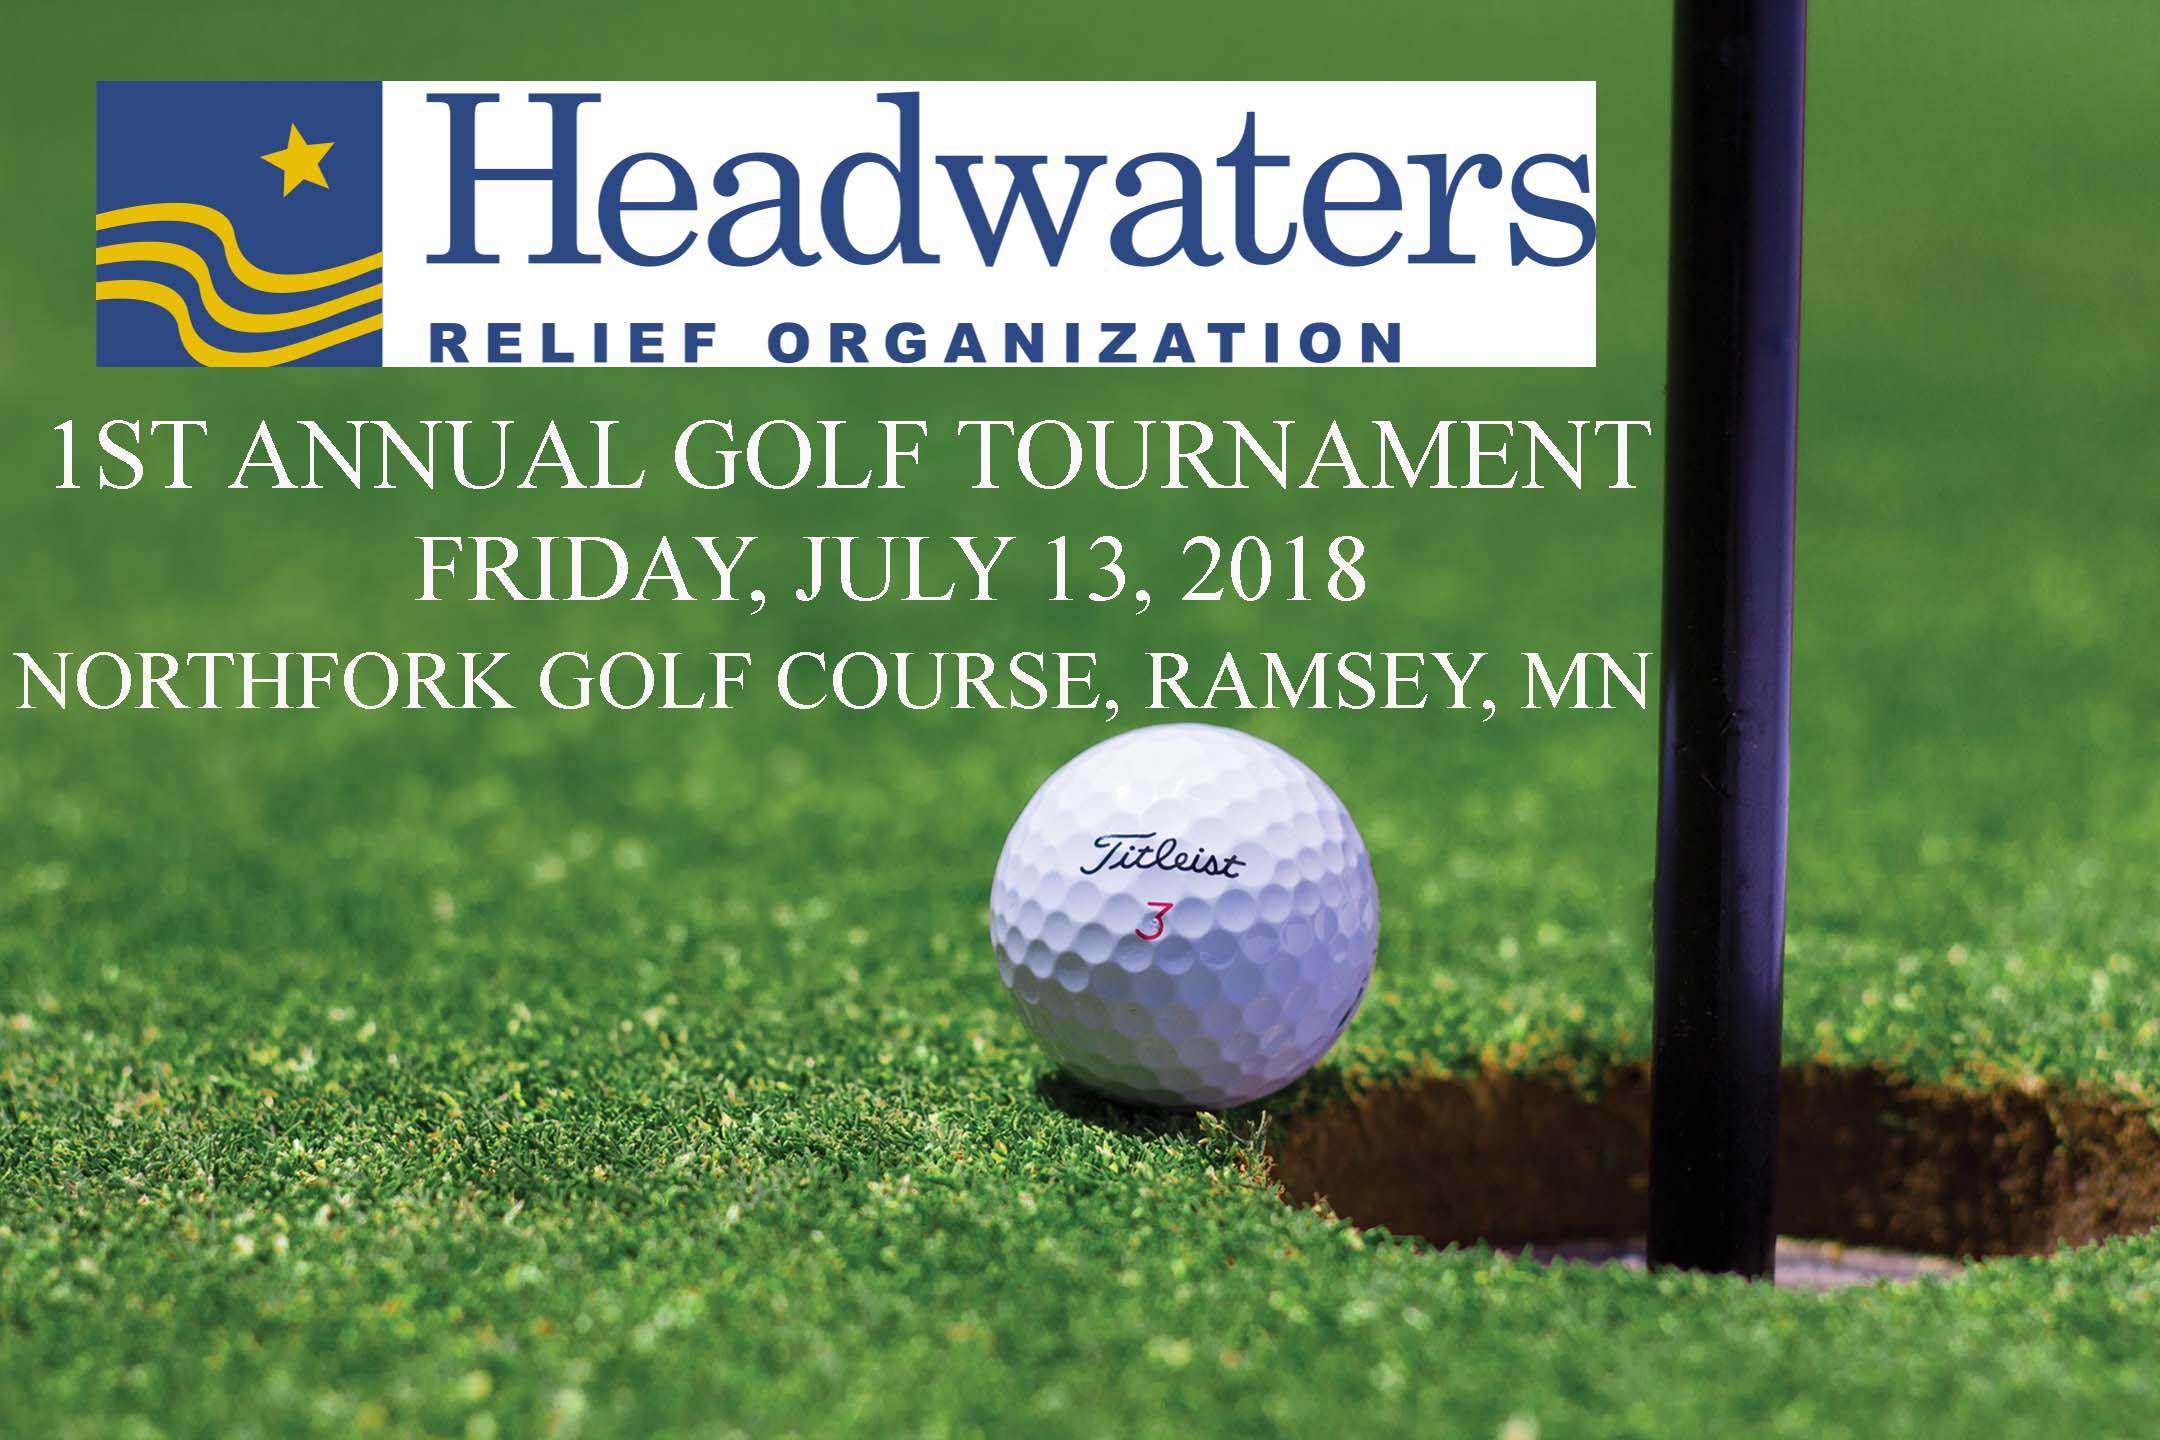 Headwaters Relief Organization 1st Annual Golf Tournament